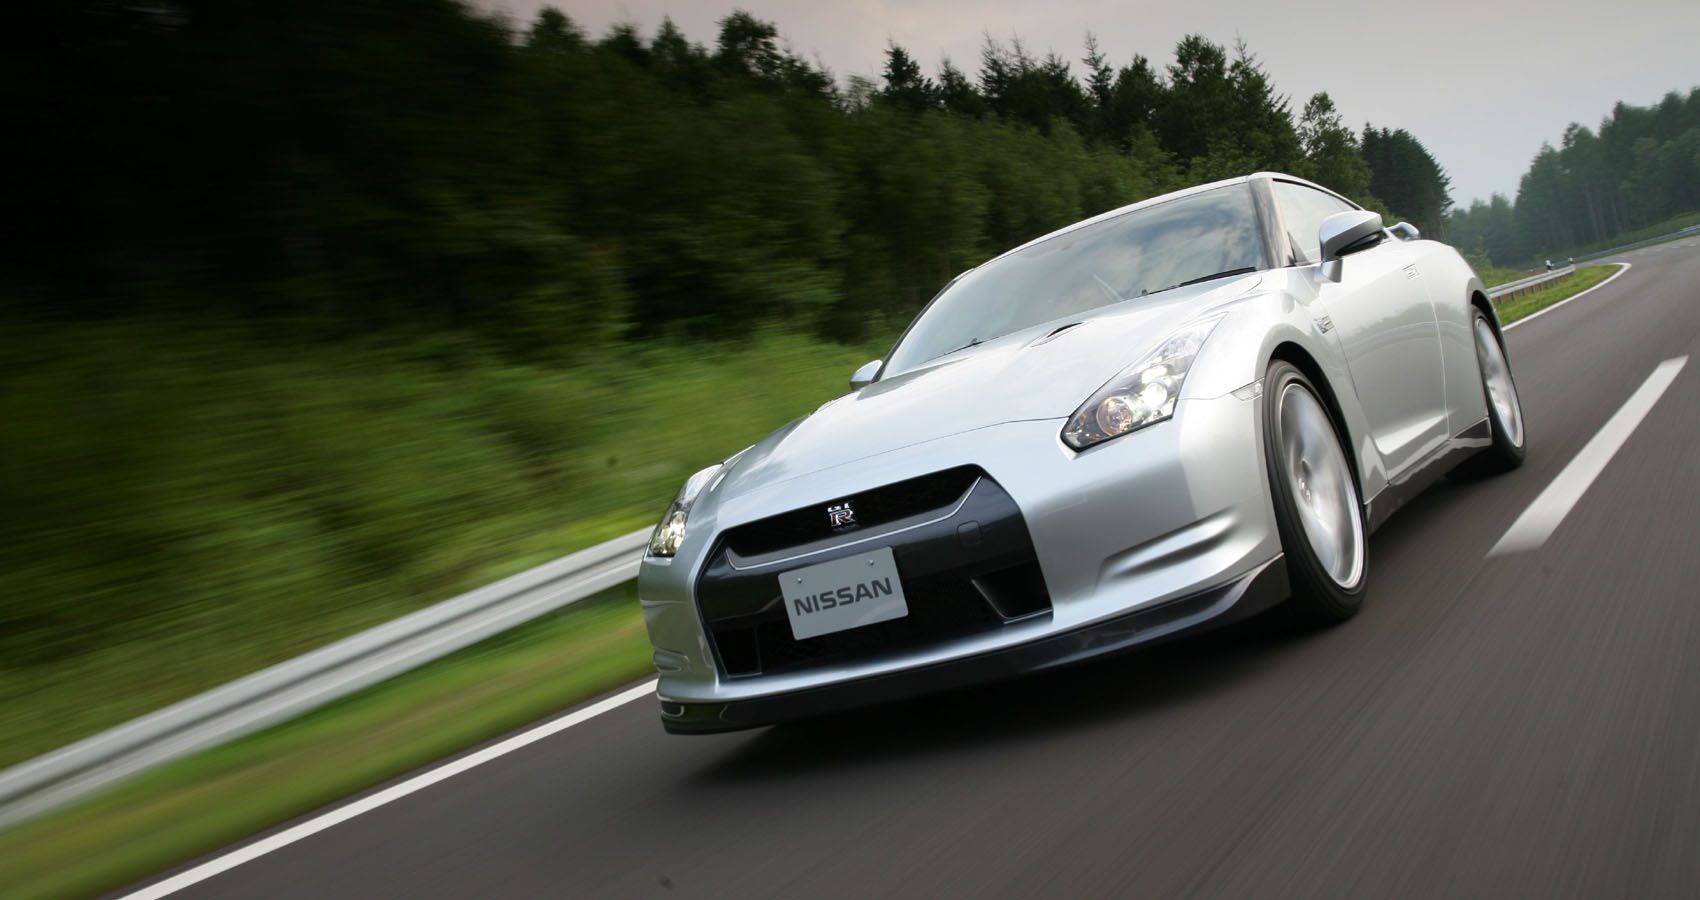 Silver 2010 Nissan GT-R on the road